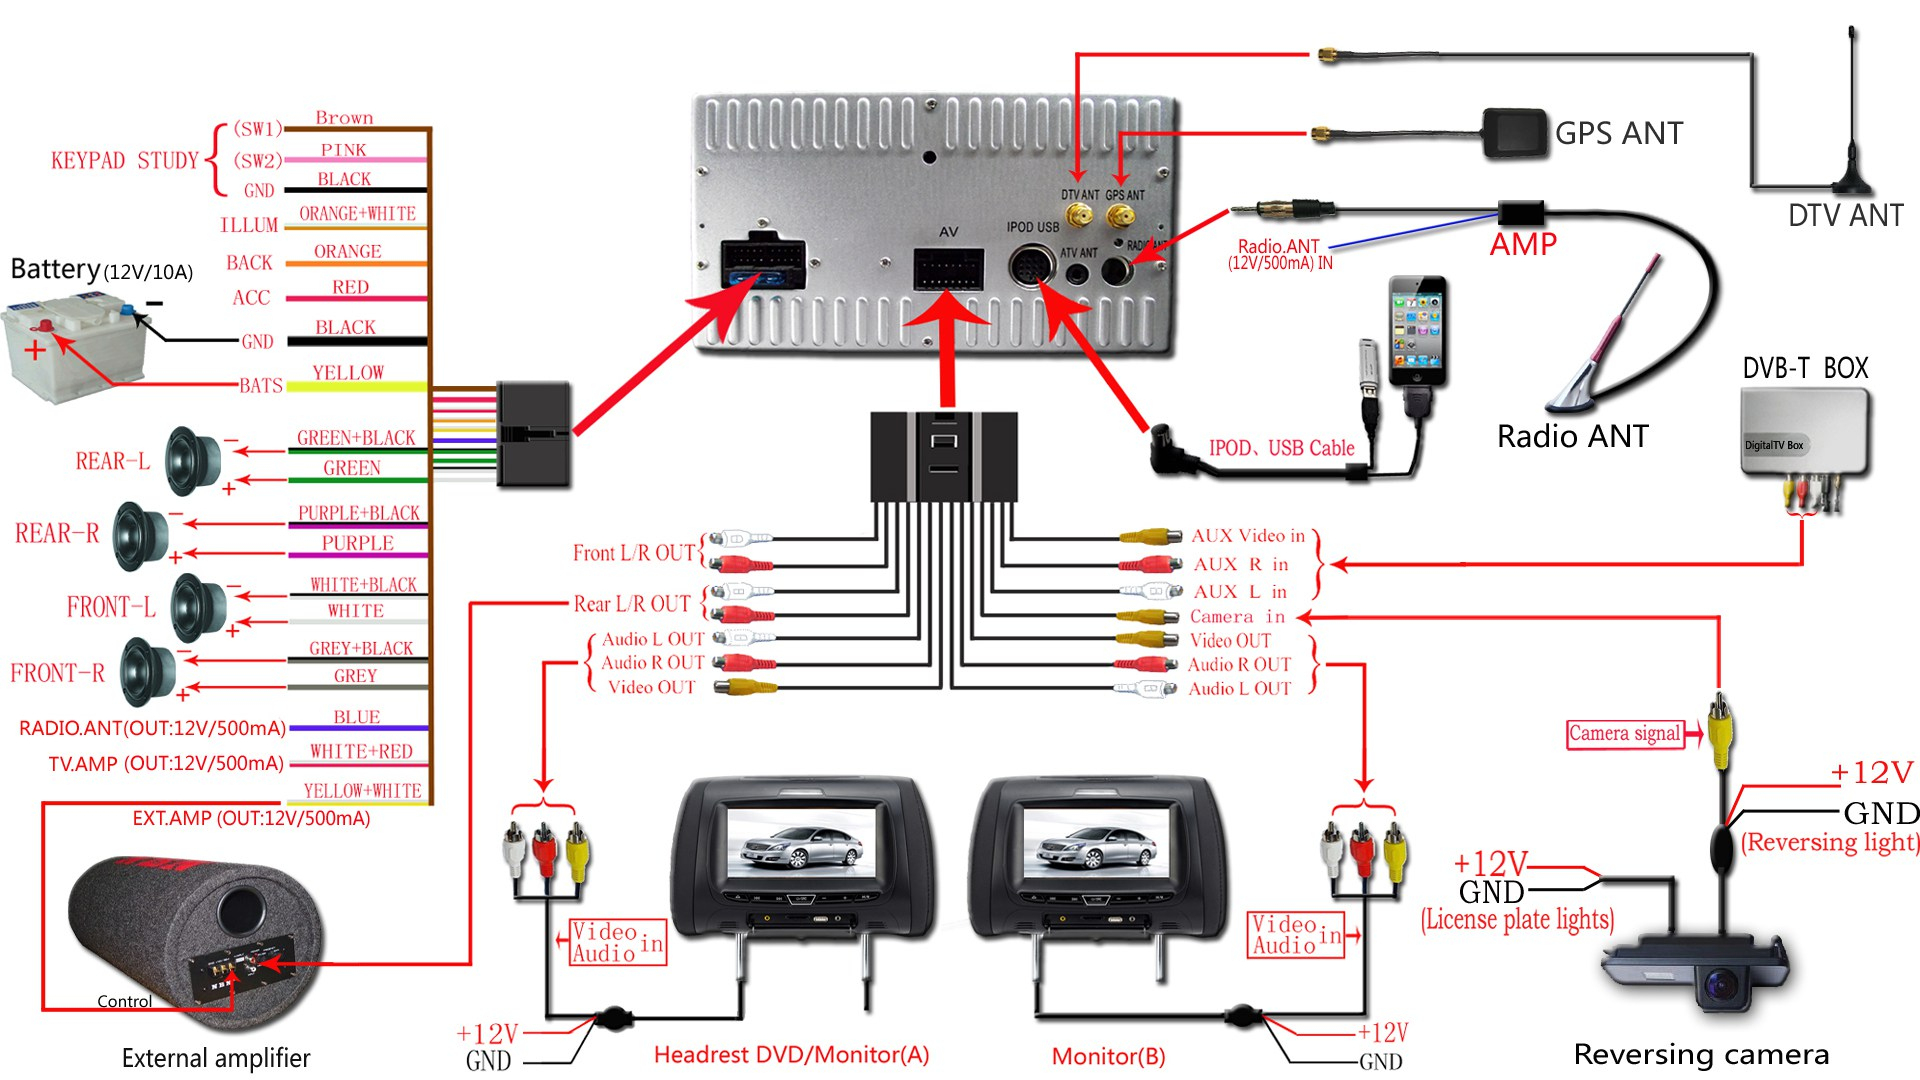 Car Stereo Diagram Sony Cd Player Wiring - Wiring Diagram Data - Car Stereo Wiring Diagram